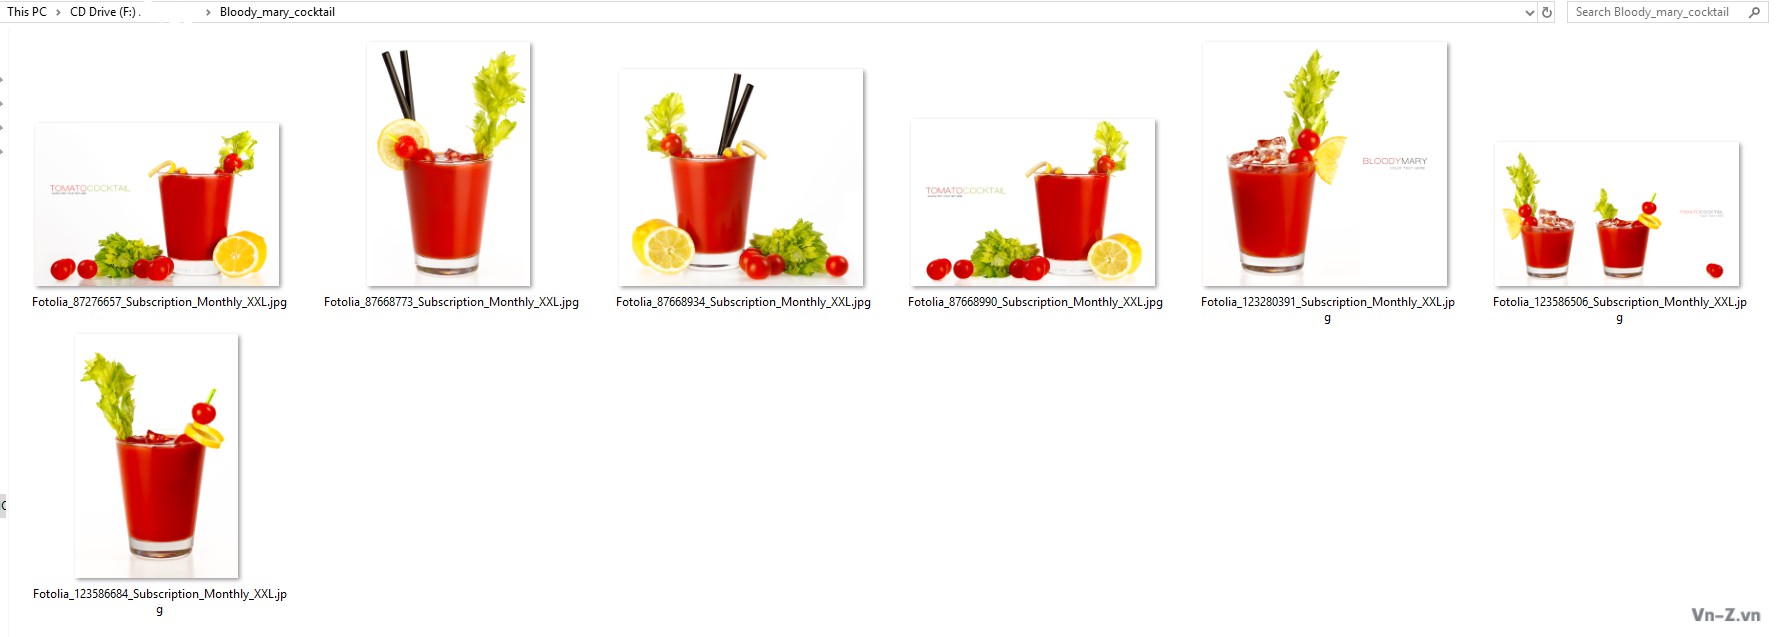 033-Bloody_mary_cocktail.jpg